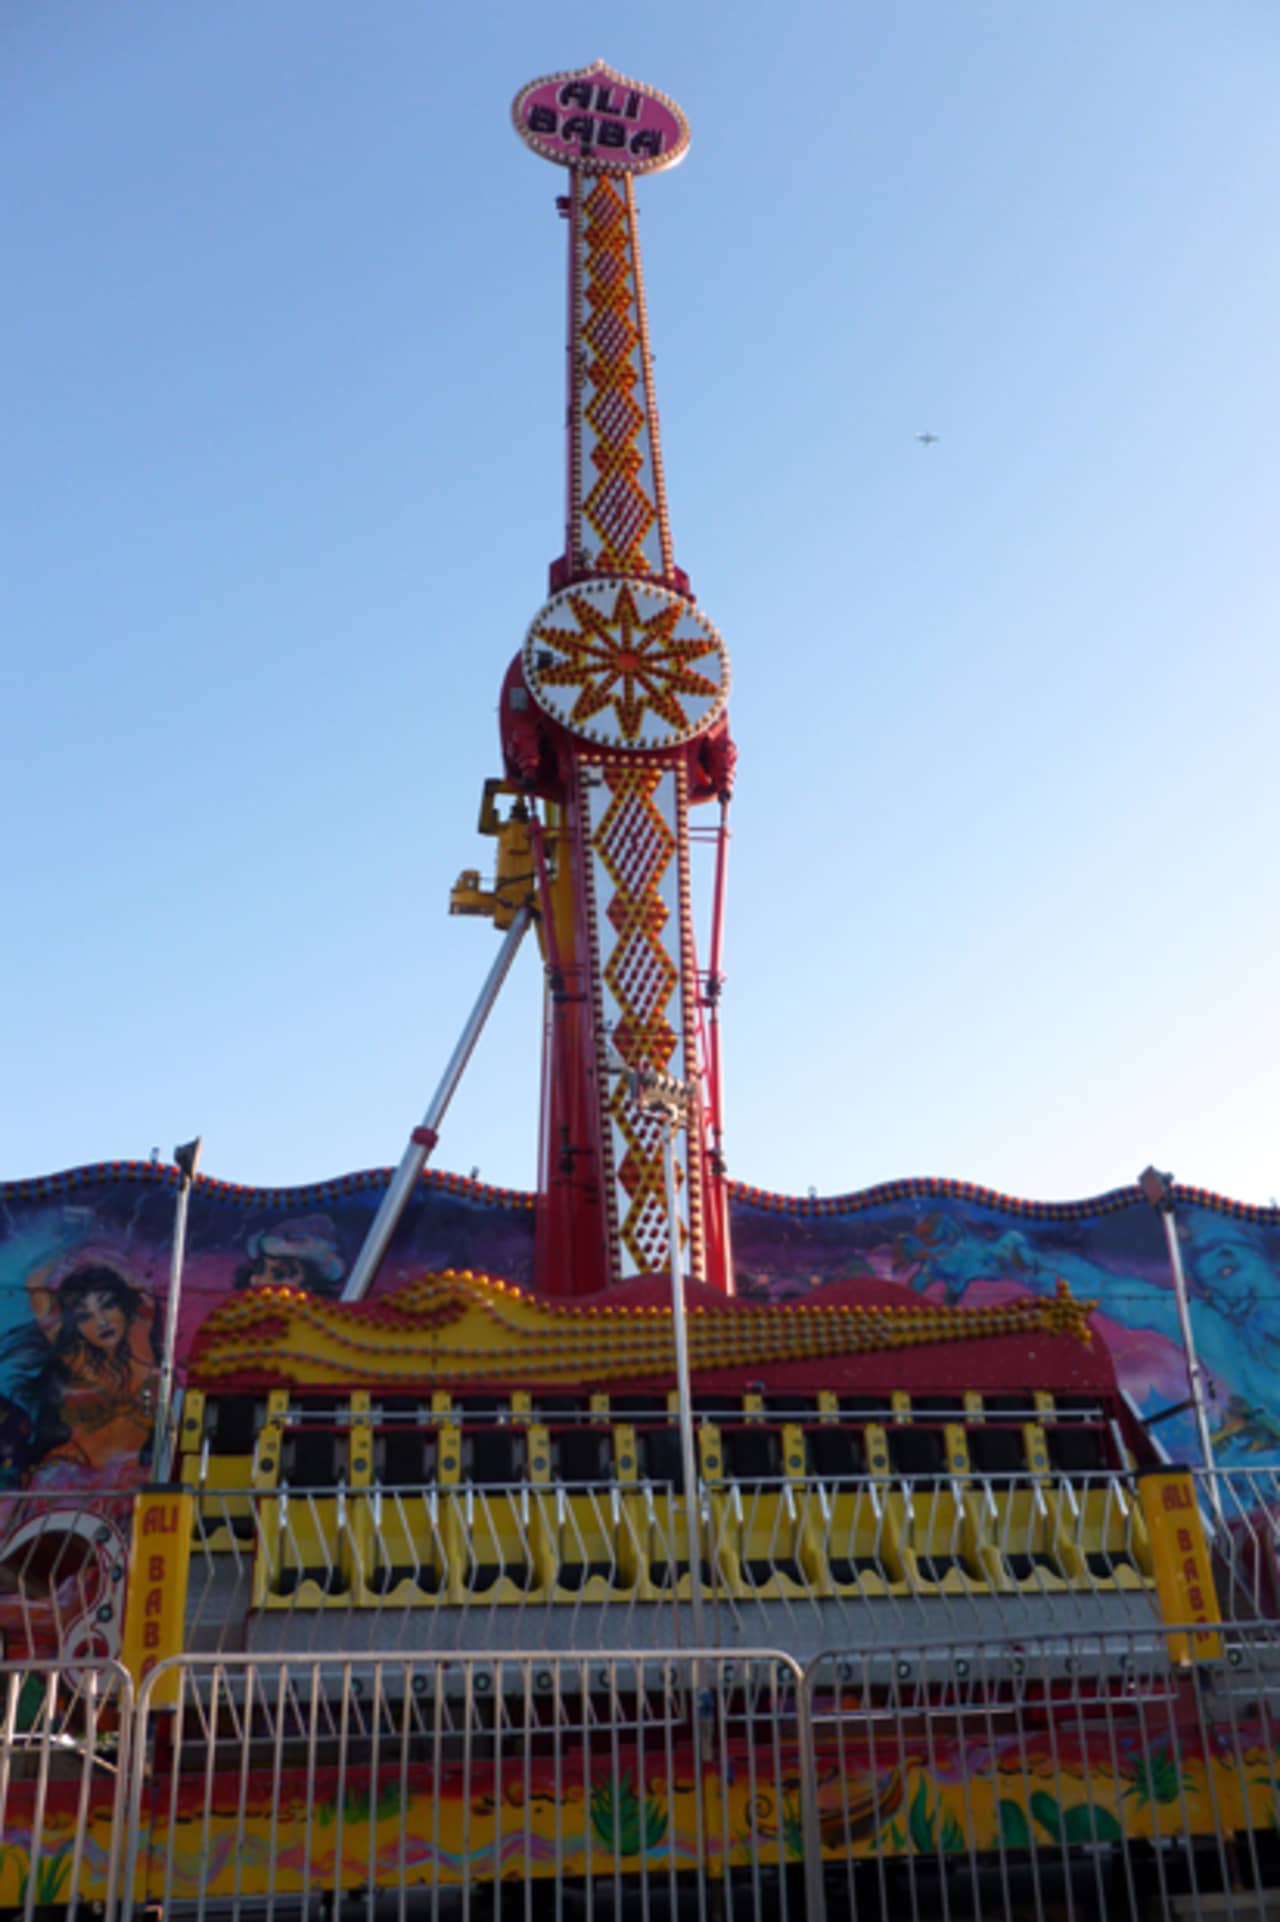 Enjoy a day of carnival rides, games, food and fun at Westport's annual Yankee Doodle Fair this weekend.